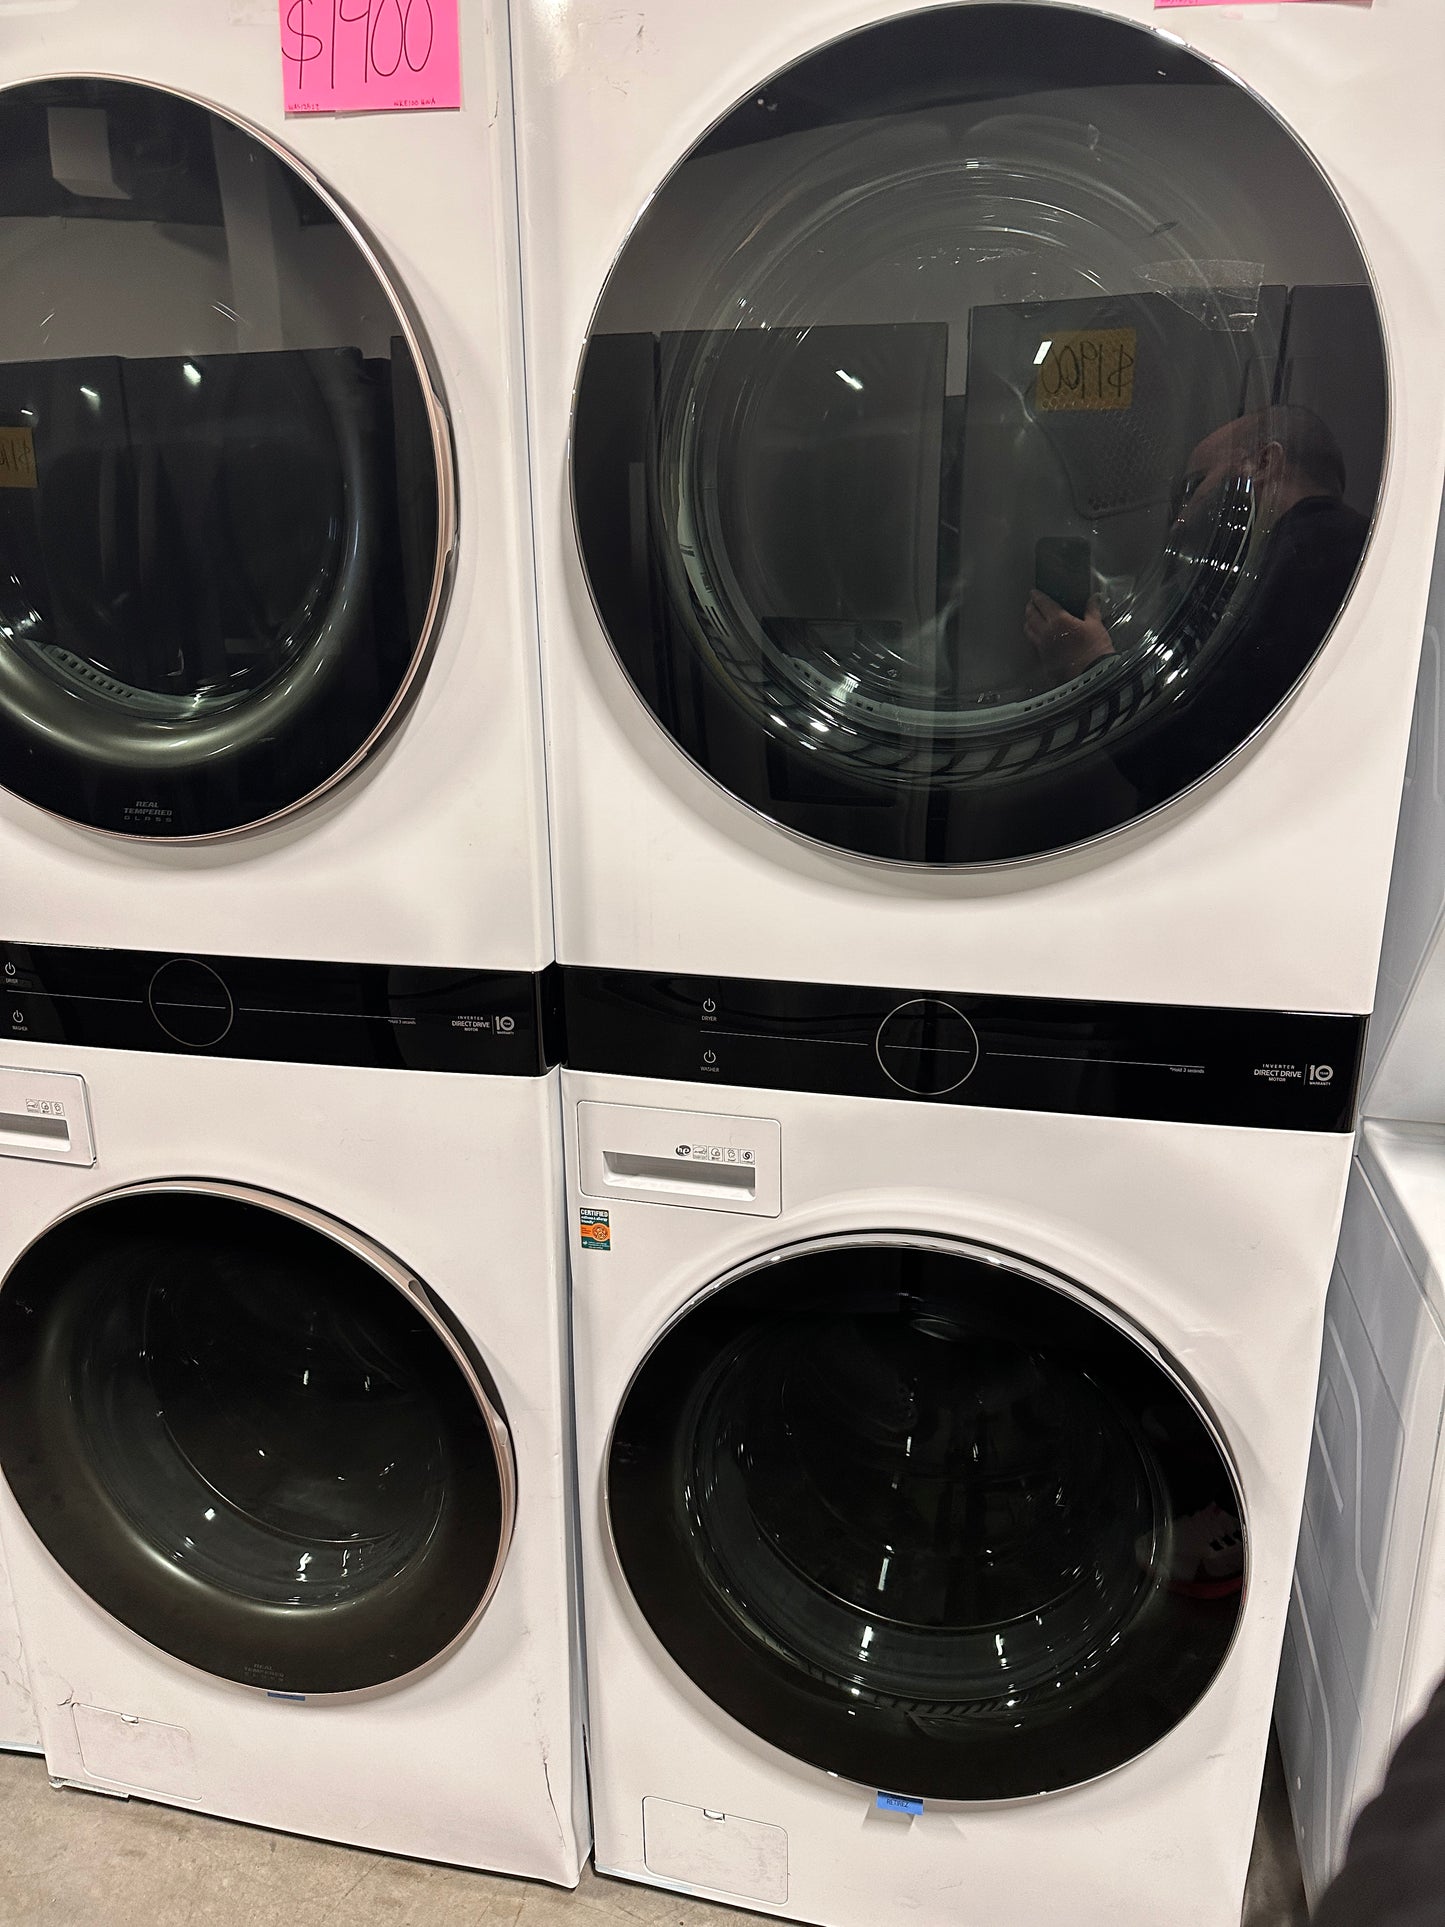 BRAND NEW ELECTRIC DRYER STACKED LAUNDRY UNIT - WAS12529 WKEX200HWA